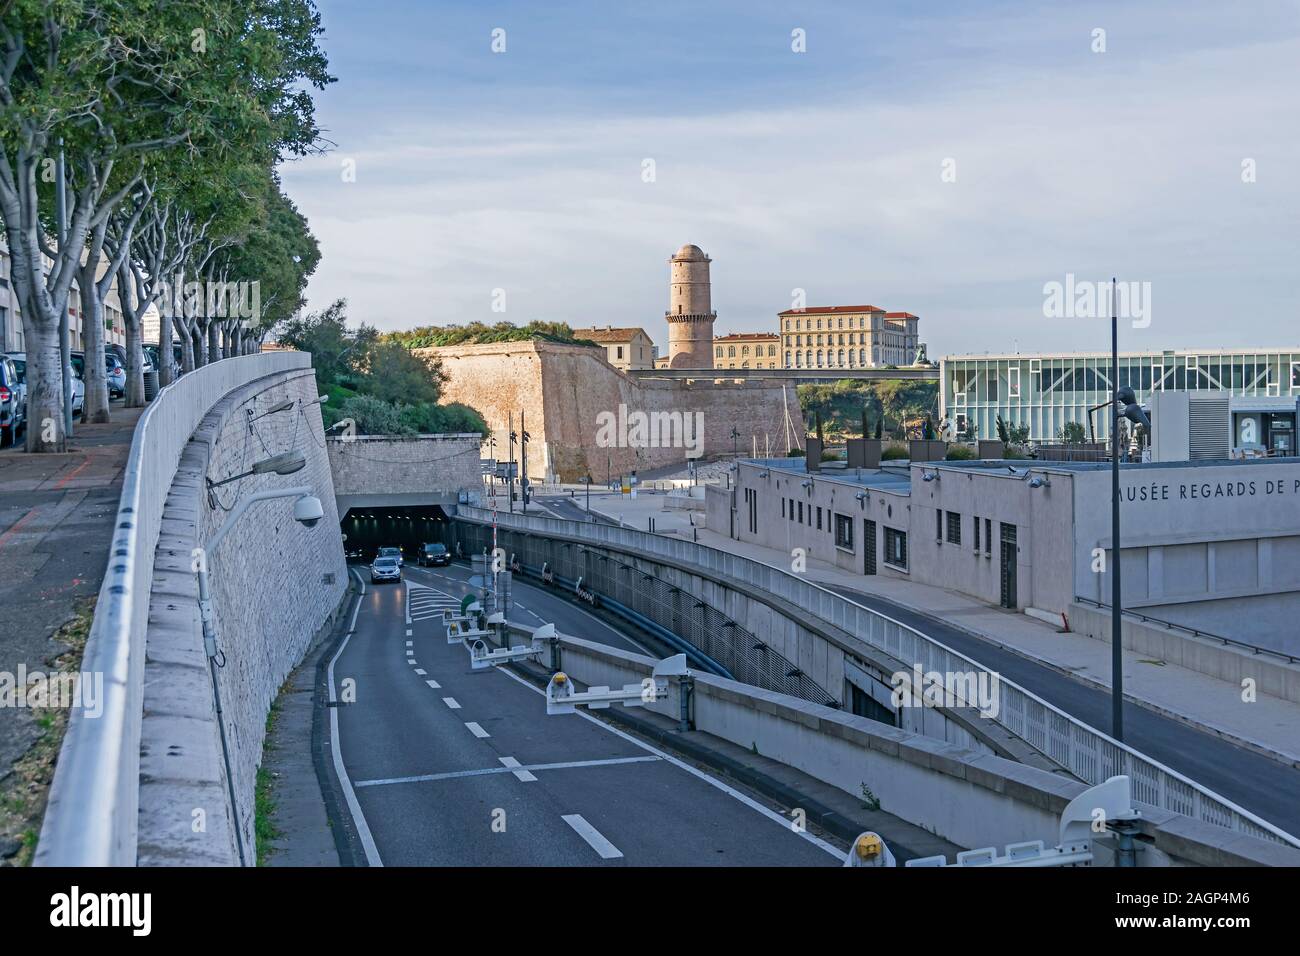 Marseille, France - November 1, 2019: View at the car road Esplanade de la Tourette, Fort Saint-Jean at the entrance to the Old Port and Avenue Vaudoy Stock Photo